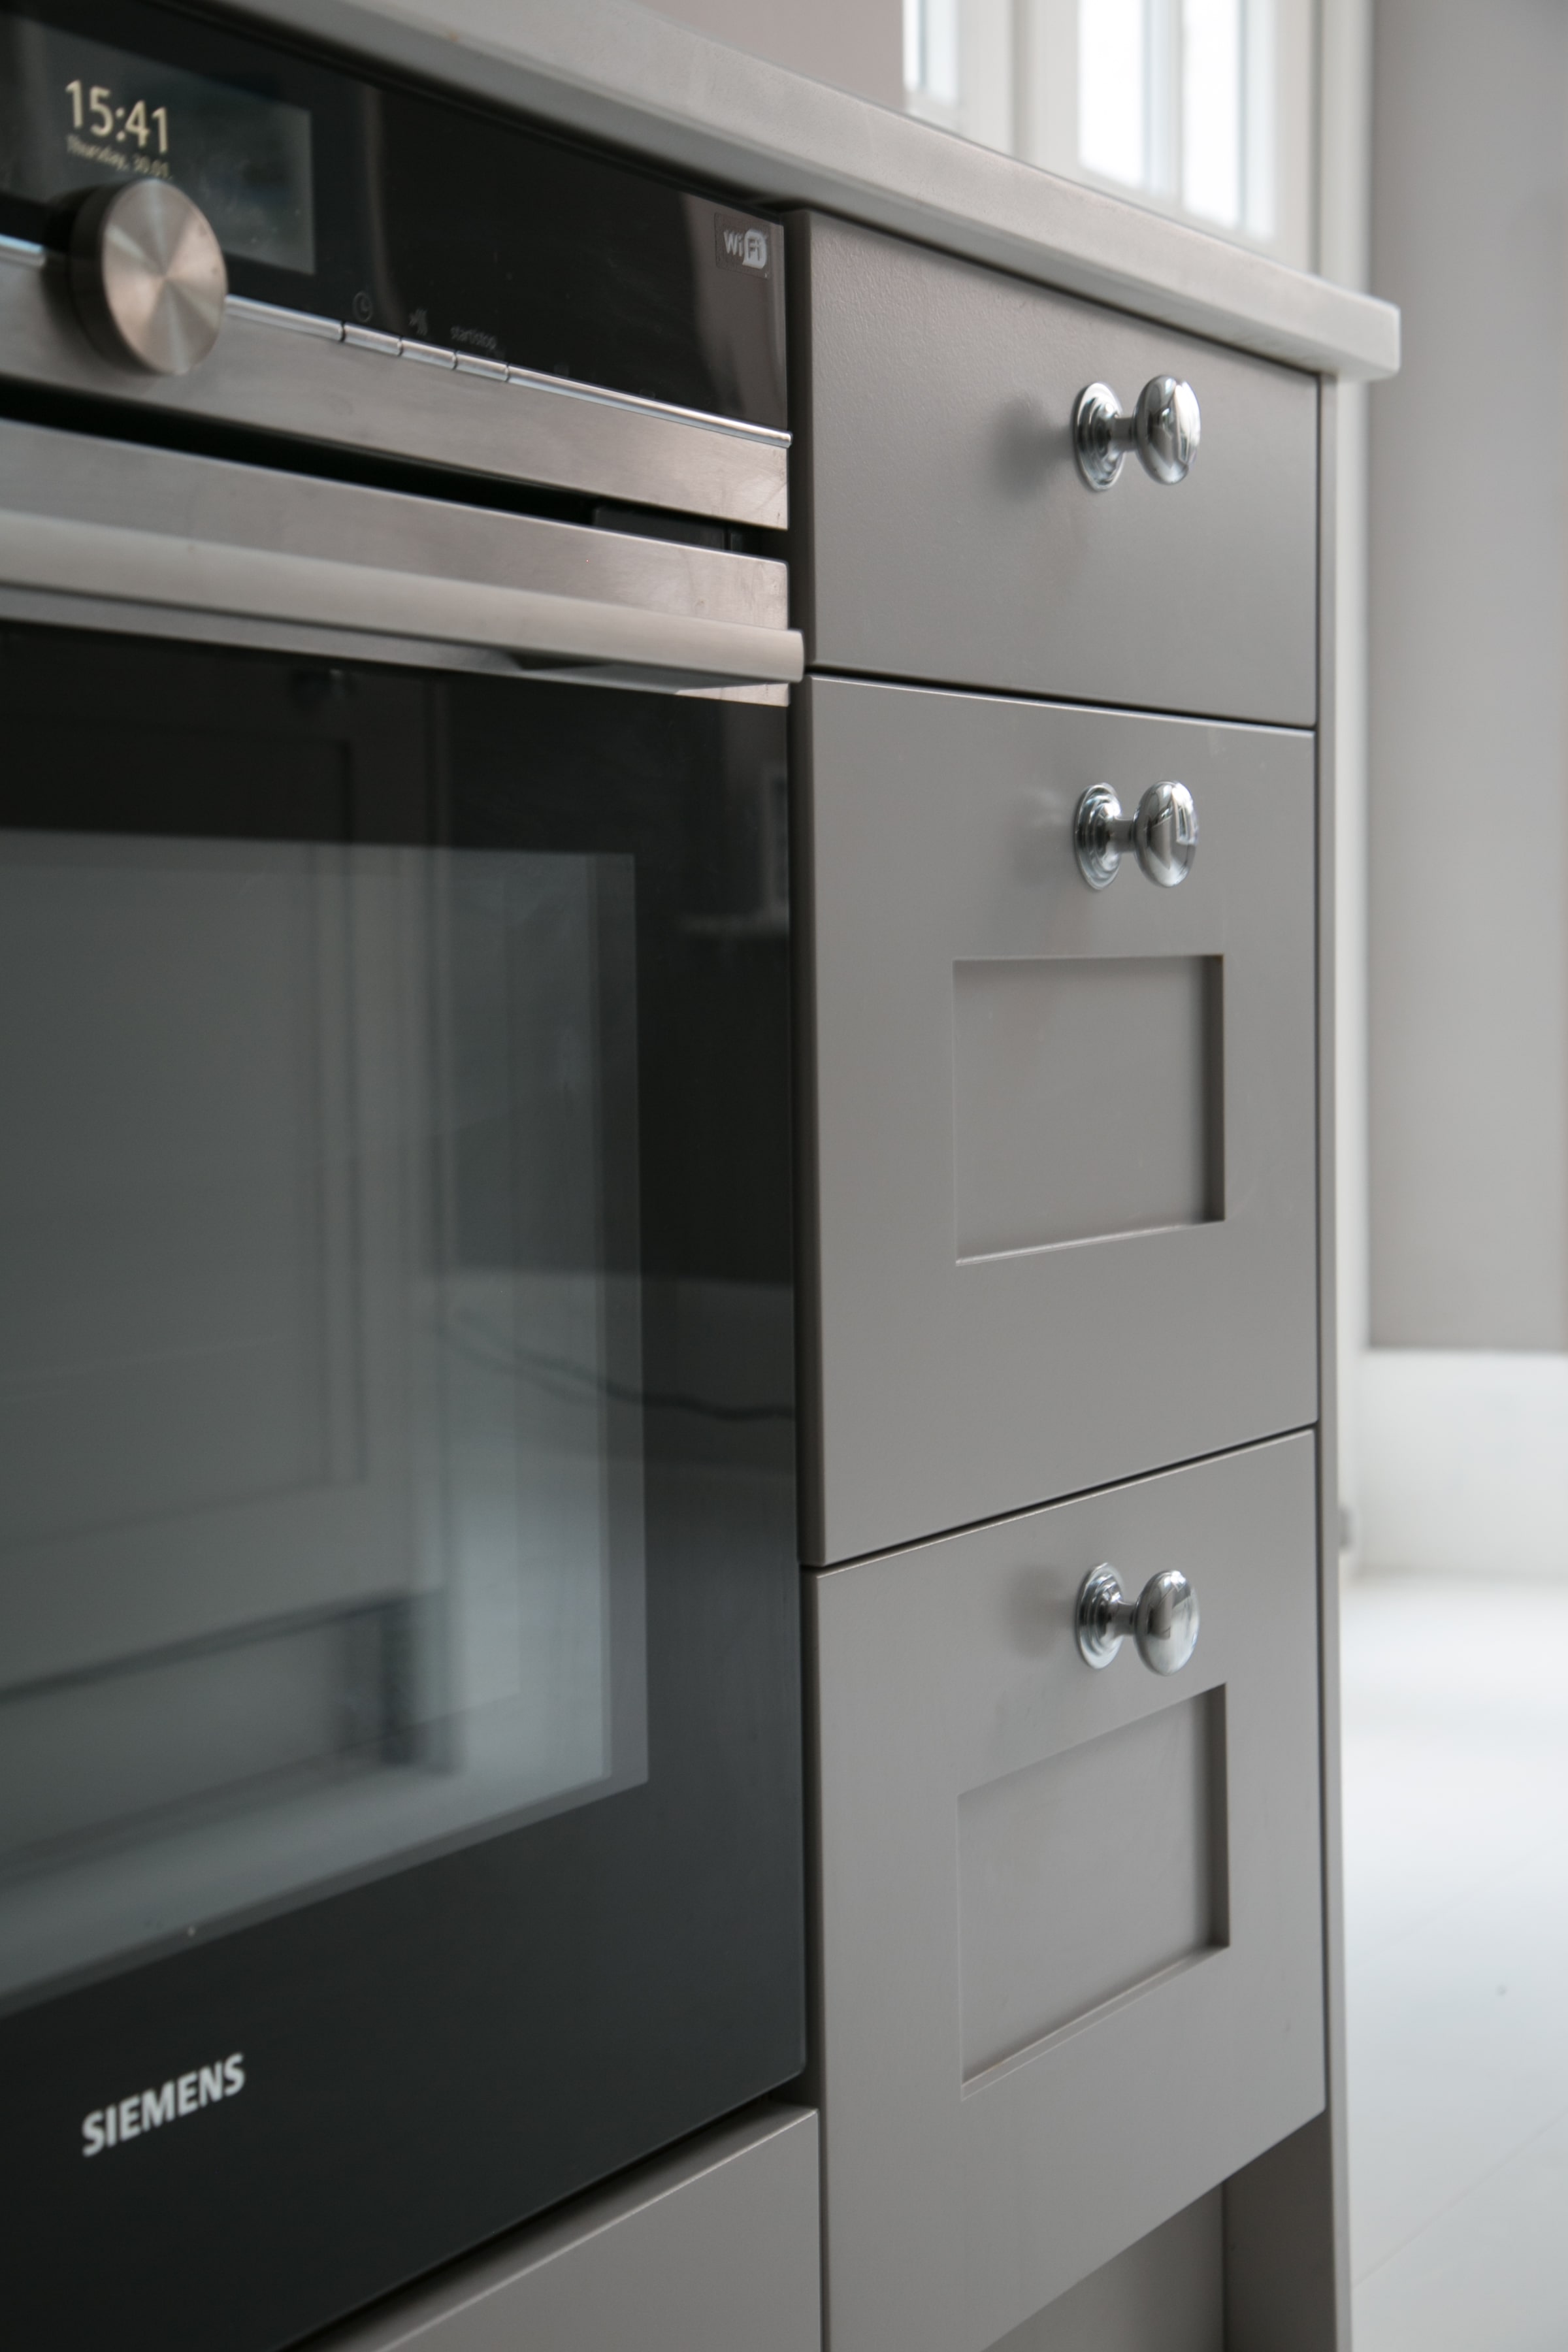 Blum Legrabox drawers with shaker fronts and simple knobs, next to oven